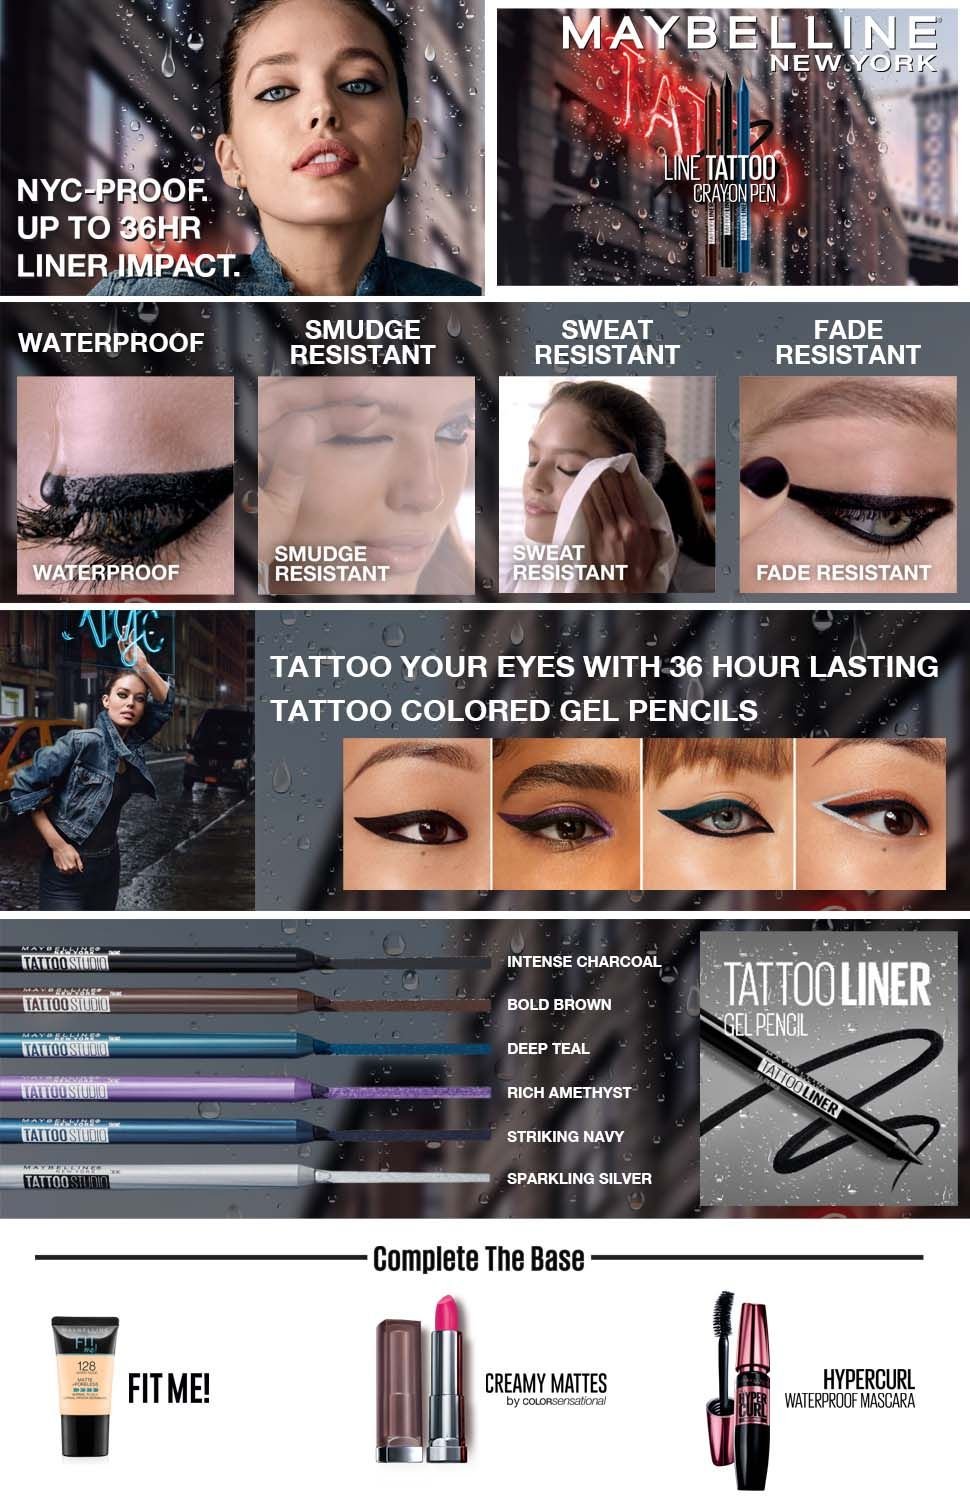 Maybelline Tattoo Studio Gel Eyeliner Pencil - Uses, Feature, How To Apply